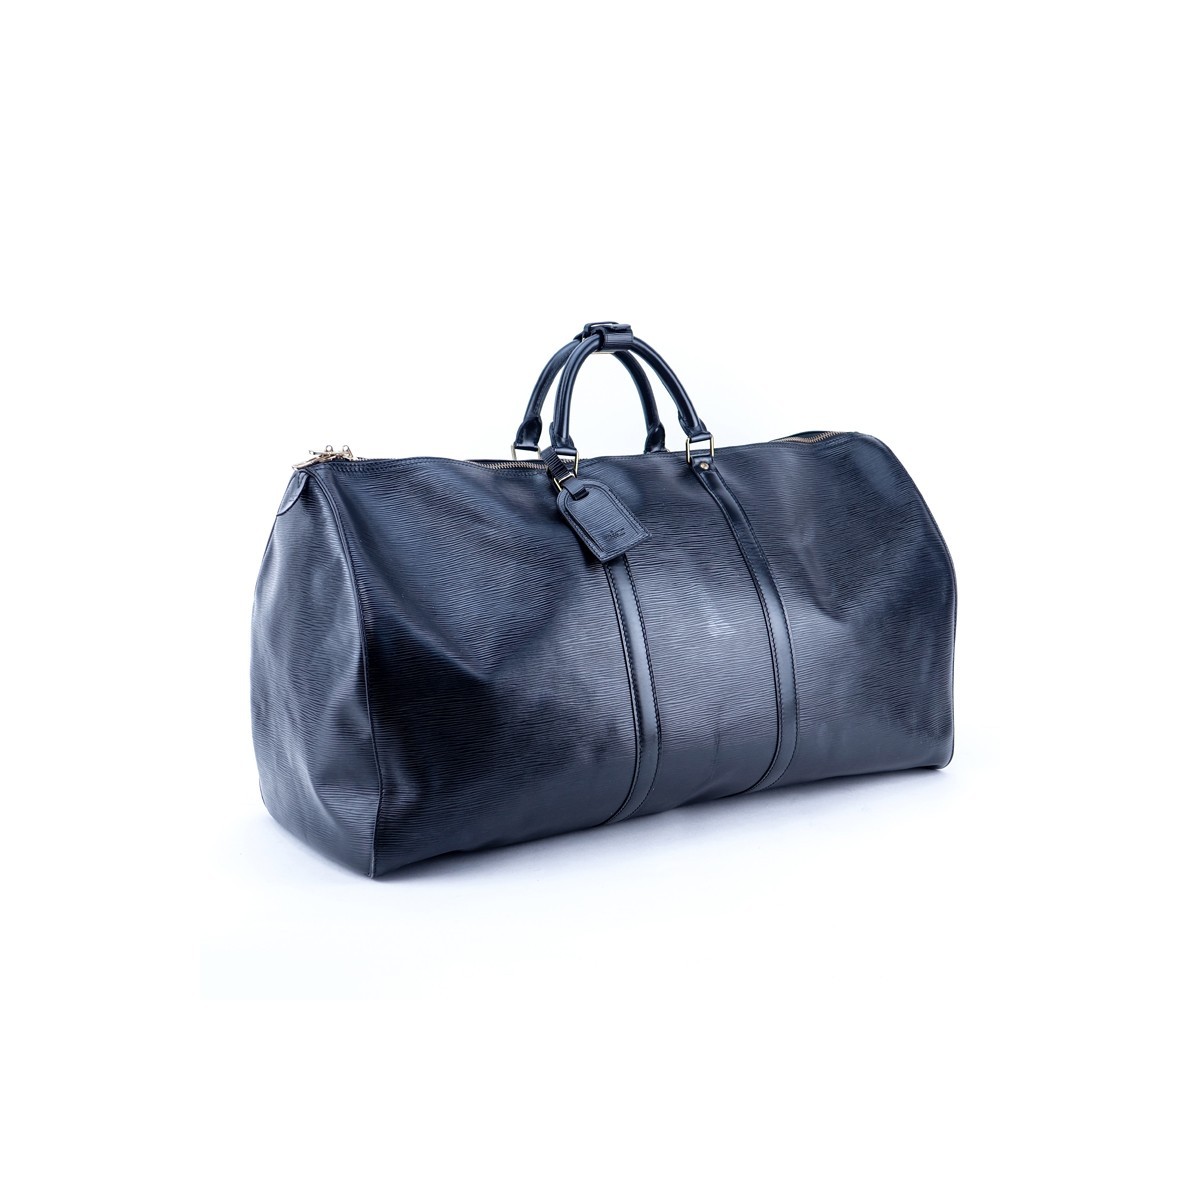 Louis Vuitton Black Epi Leather Keepall 60 Travel Bag. Golden brass hardware, leather interior, luggage tag, handle strap.